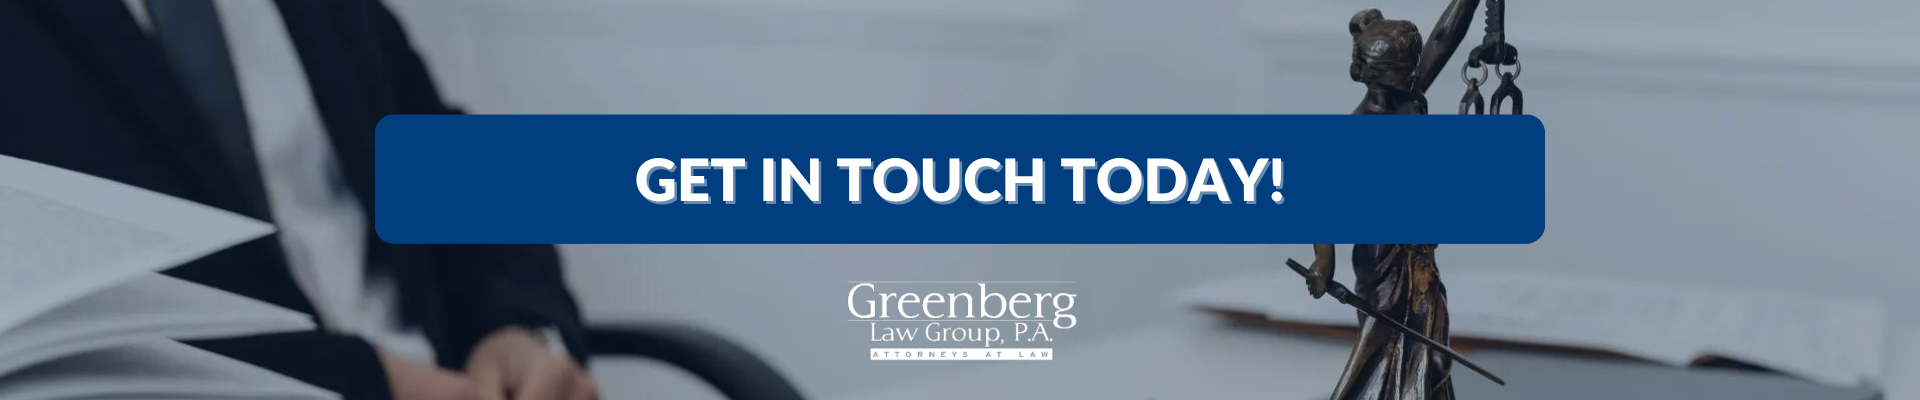 Greenberg Law Group, P.A. - Get in touch today!